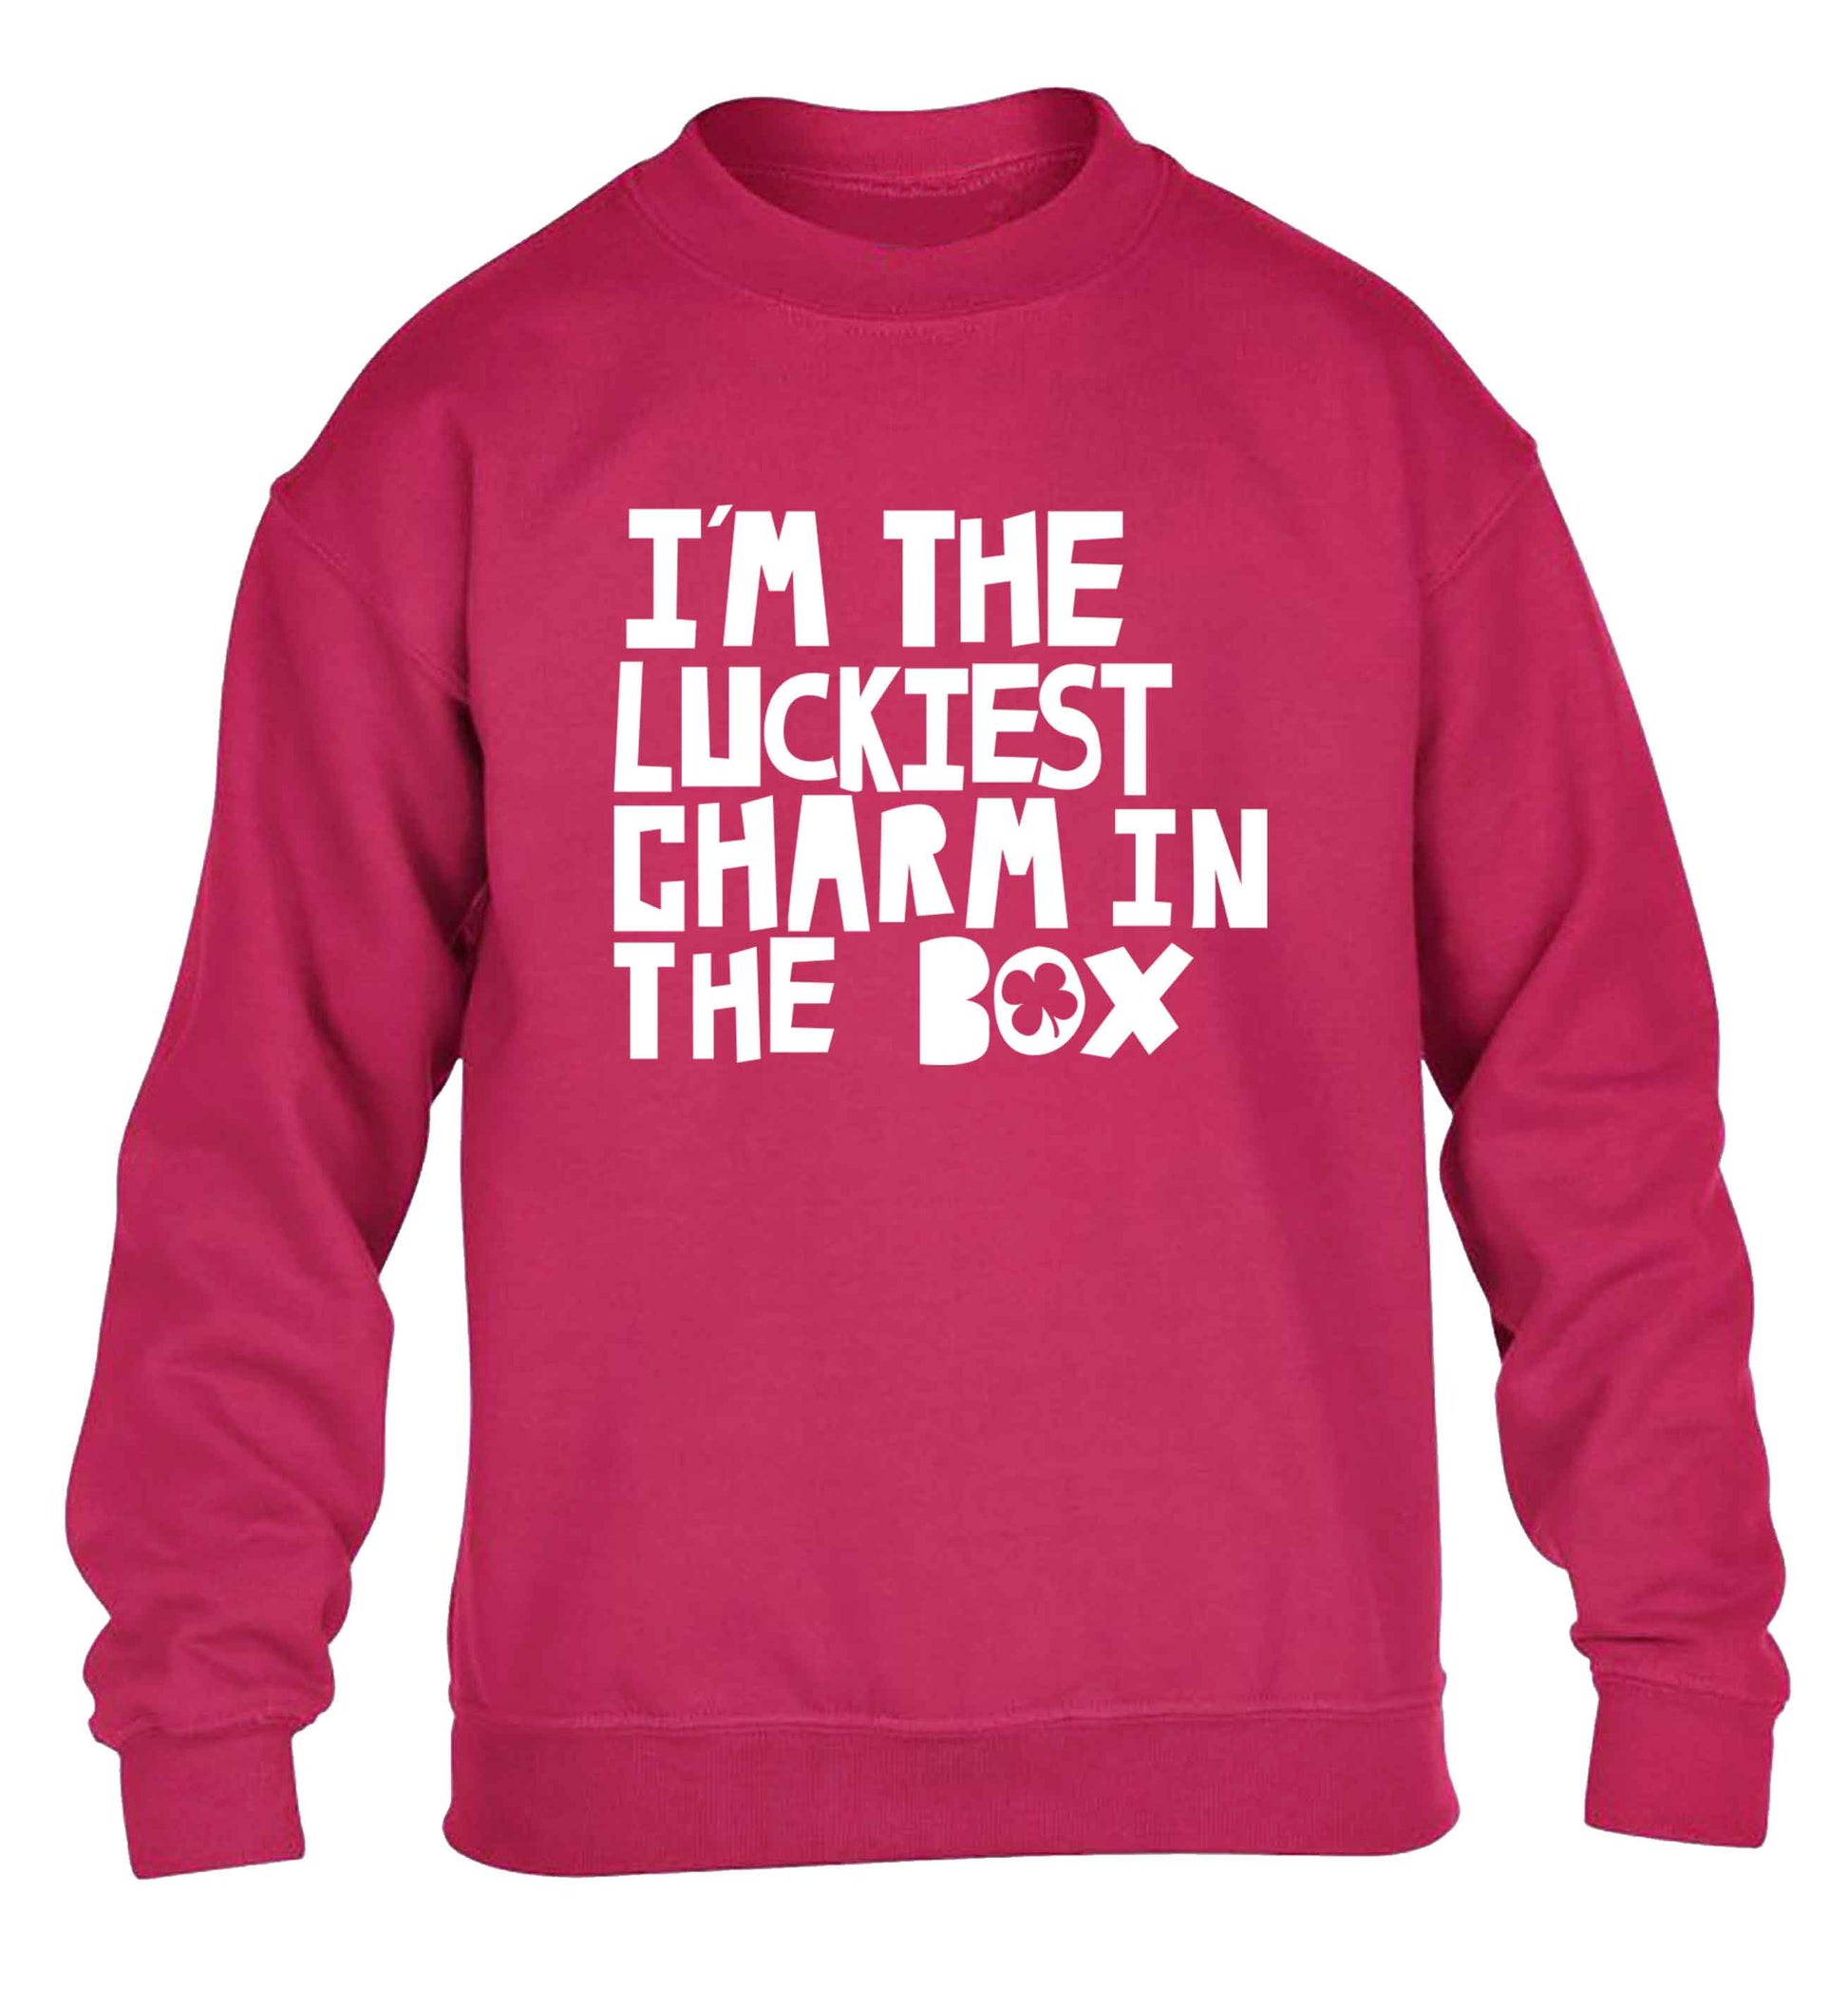 I'm the luckiest charm in the box children's pink sweater 12-13 Years